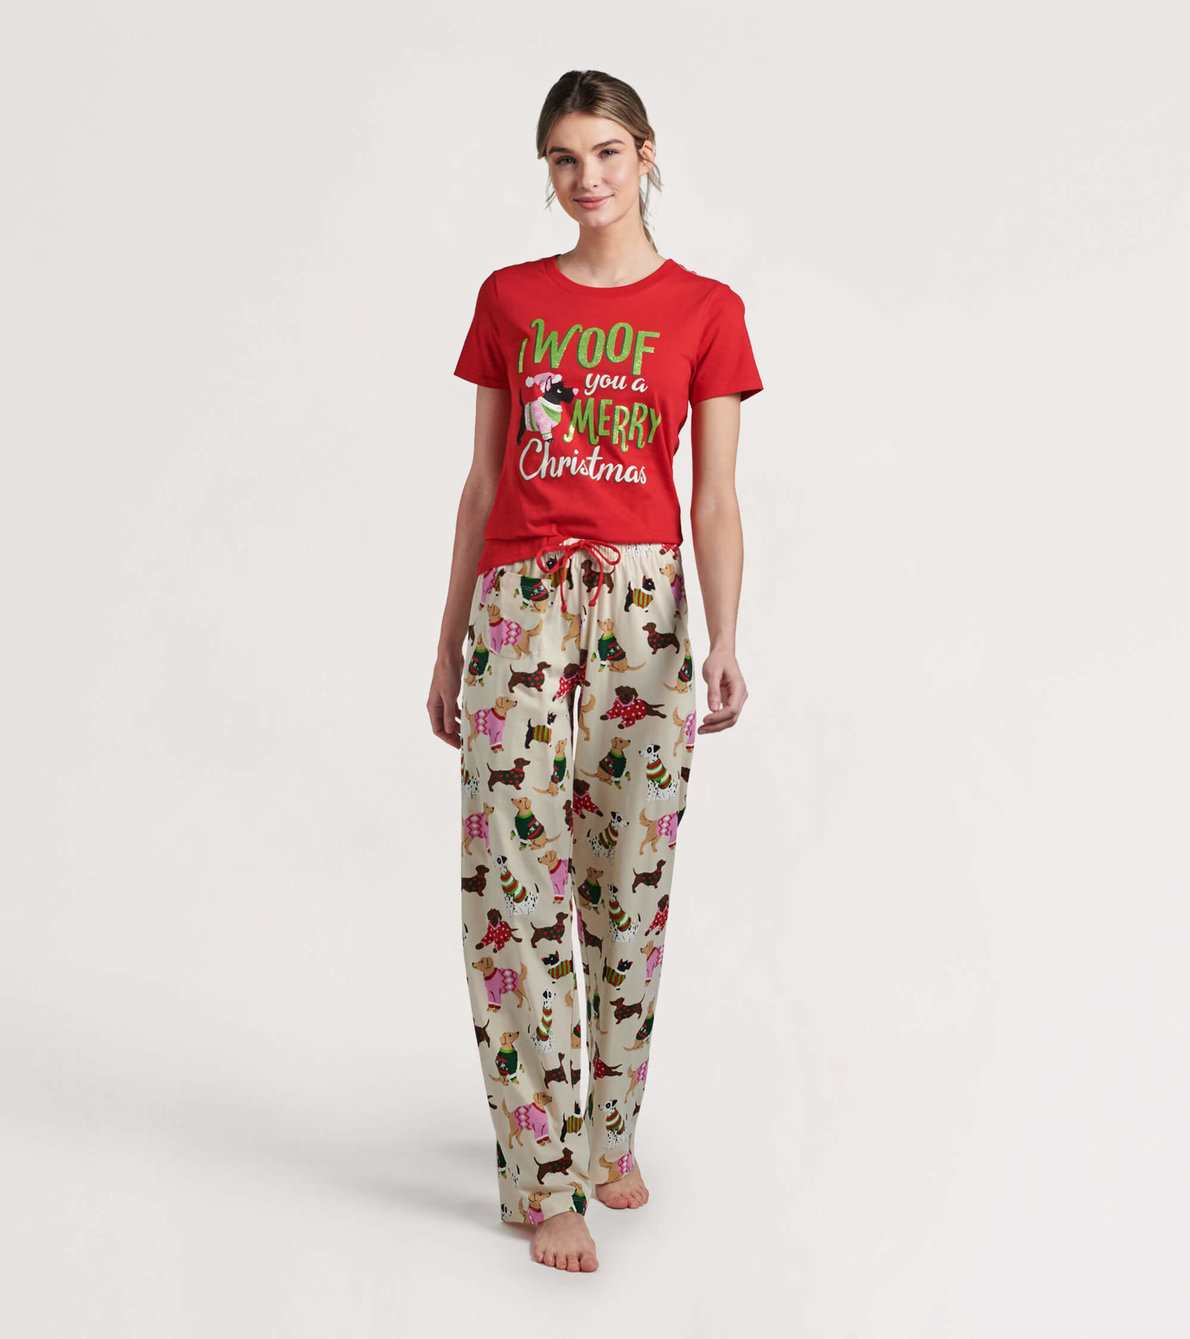 View larger image of Woofing Christmas Women's Tee and Pants Pajama Separates